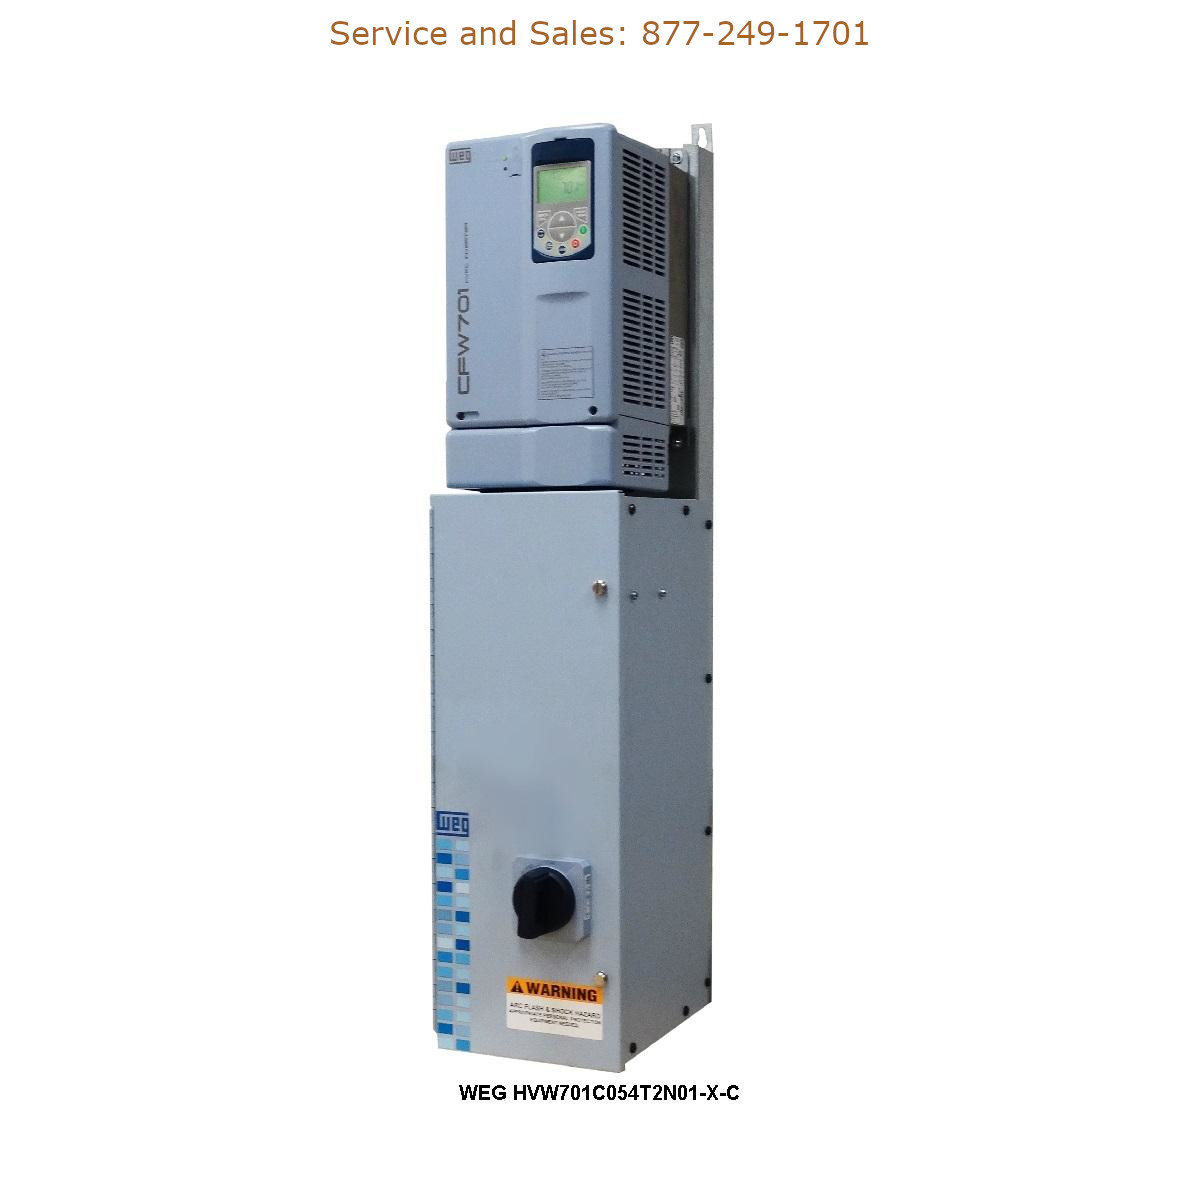 WEG HVW701C054T2N01-X-C WEG Model Number HVW701C054T2N01-X-C WEG Drives, Variable Speed Drives Repair Service, Troubleshooting, Replacement Parts https://gesrepair.com/wp-content/uploads/2022/WEG/WEG_HVW701C054T2N01-X-C_Drives_Variable_Speed_Drives.jpg